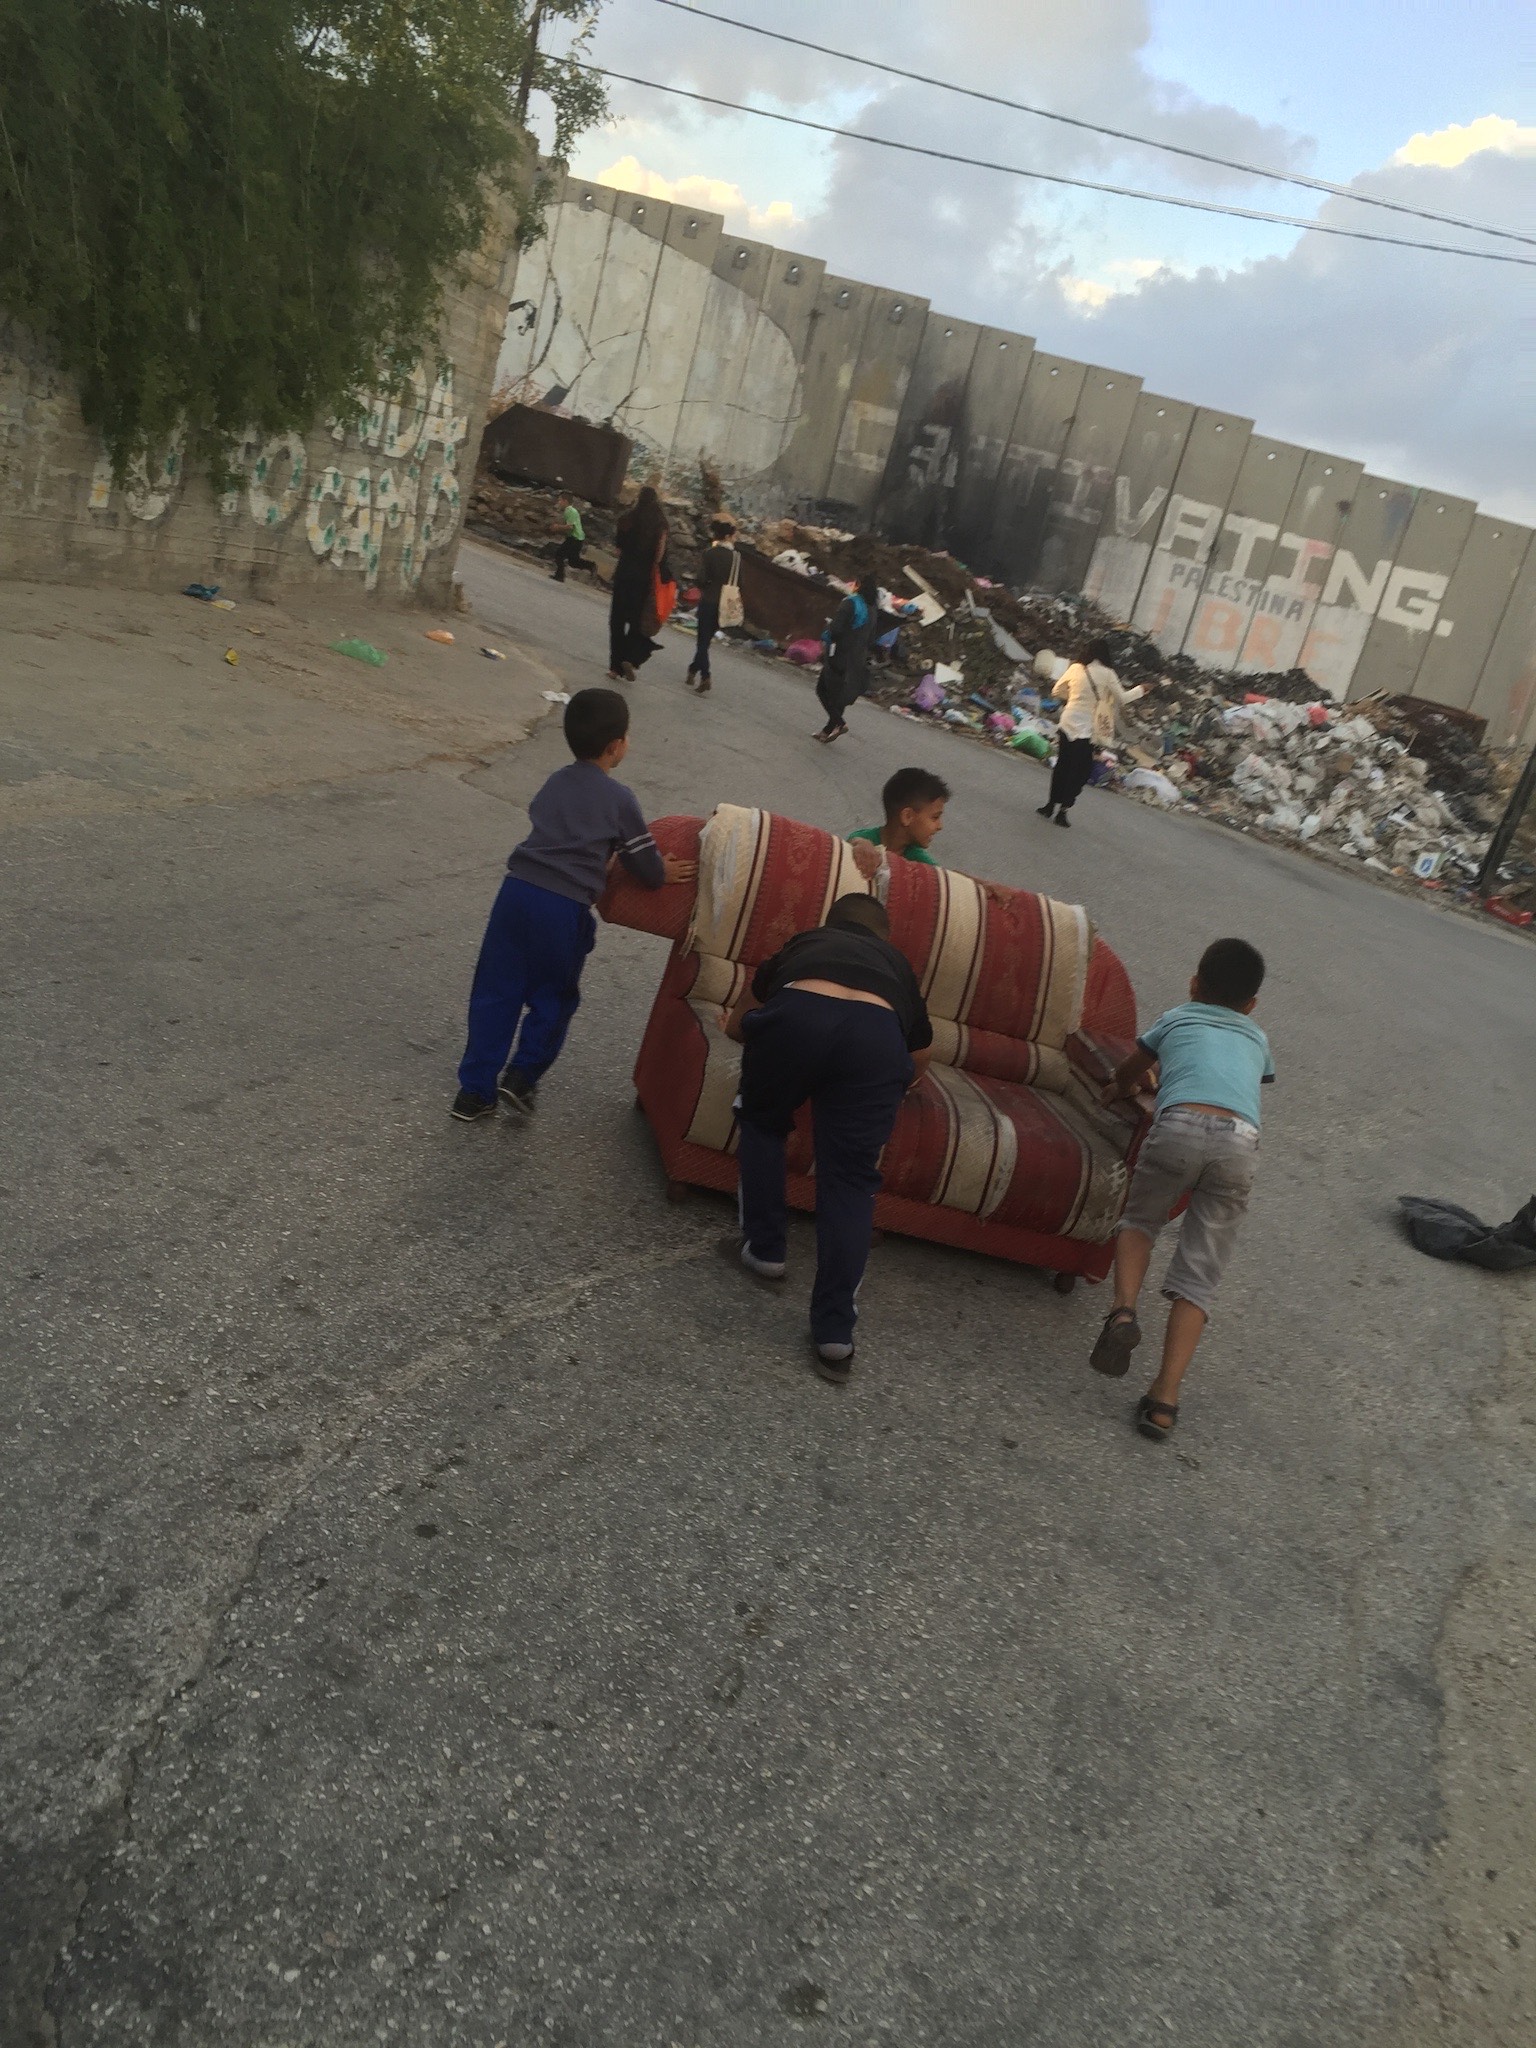 Young boys pushing a couch on a street in Palestine